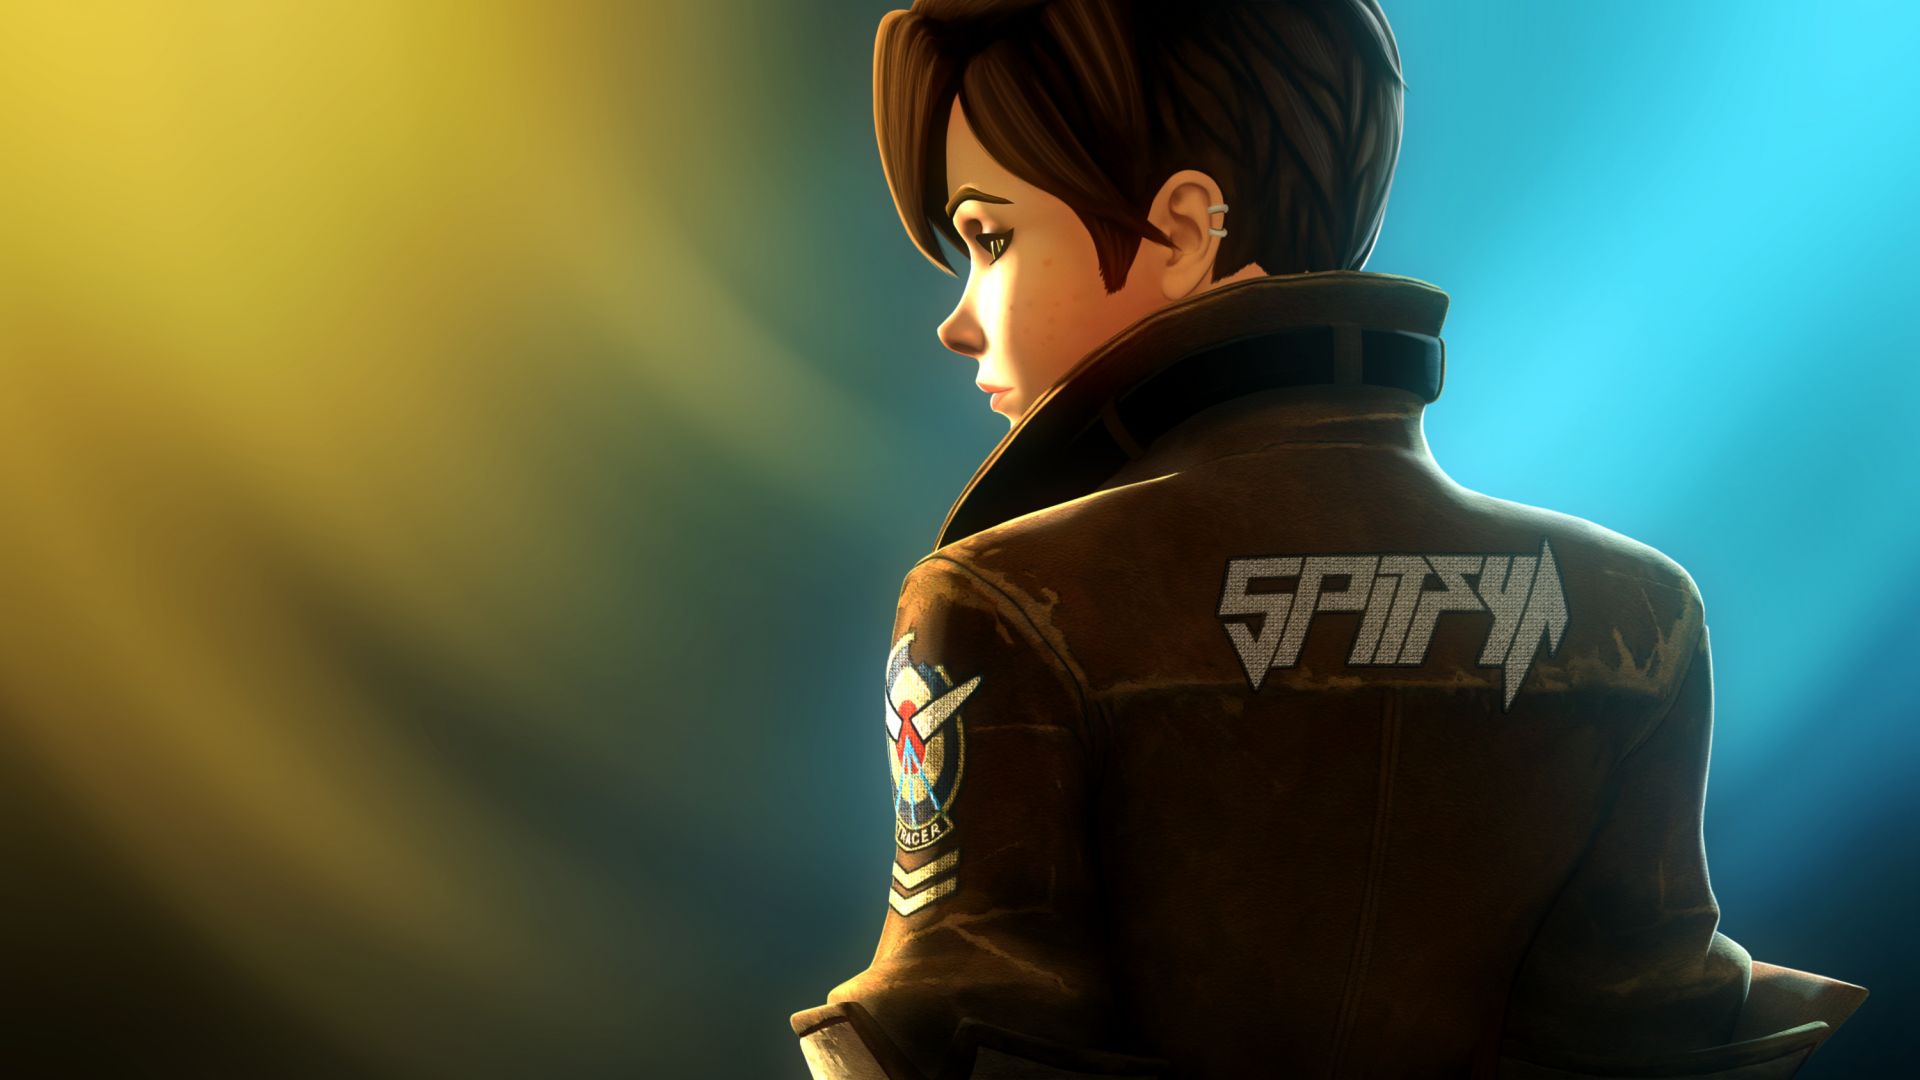 Wallpaper Tracer, jacket, overwatch, game, video game